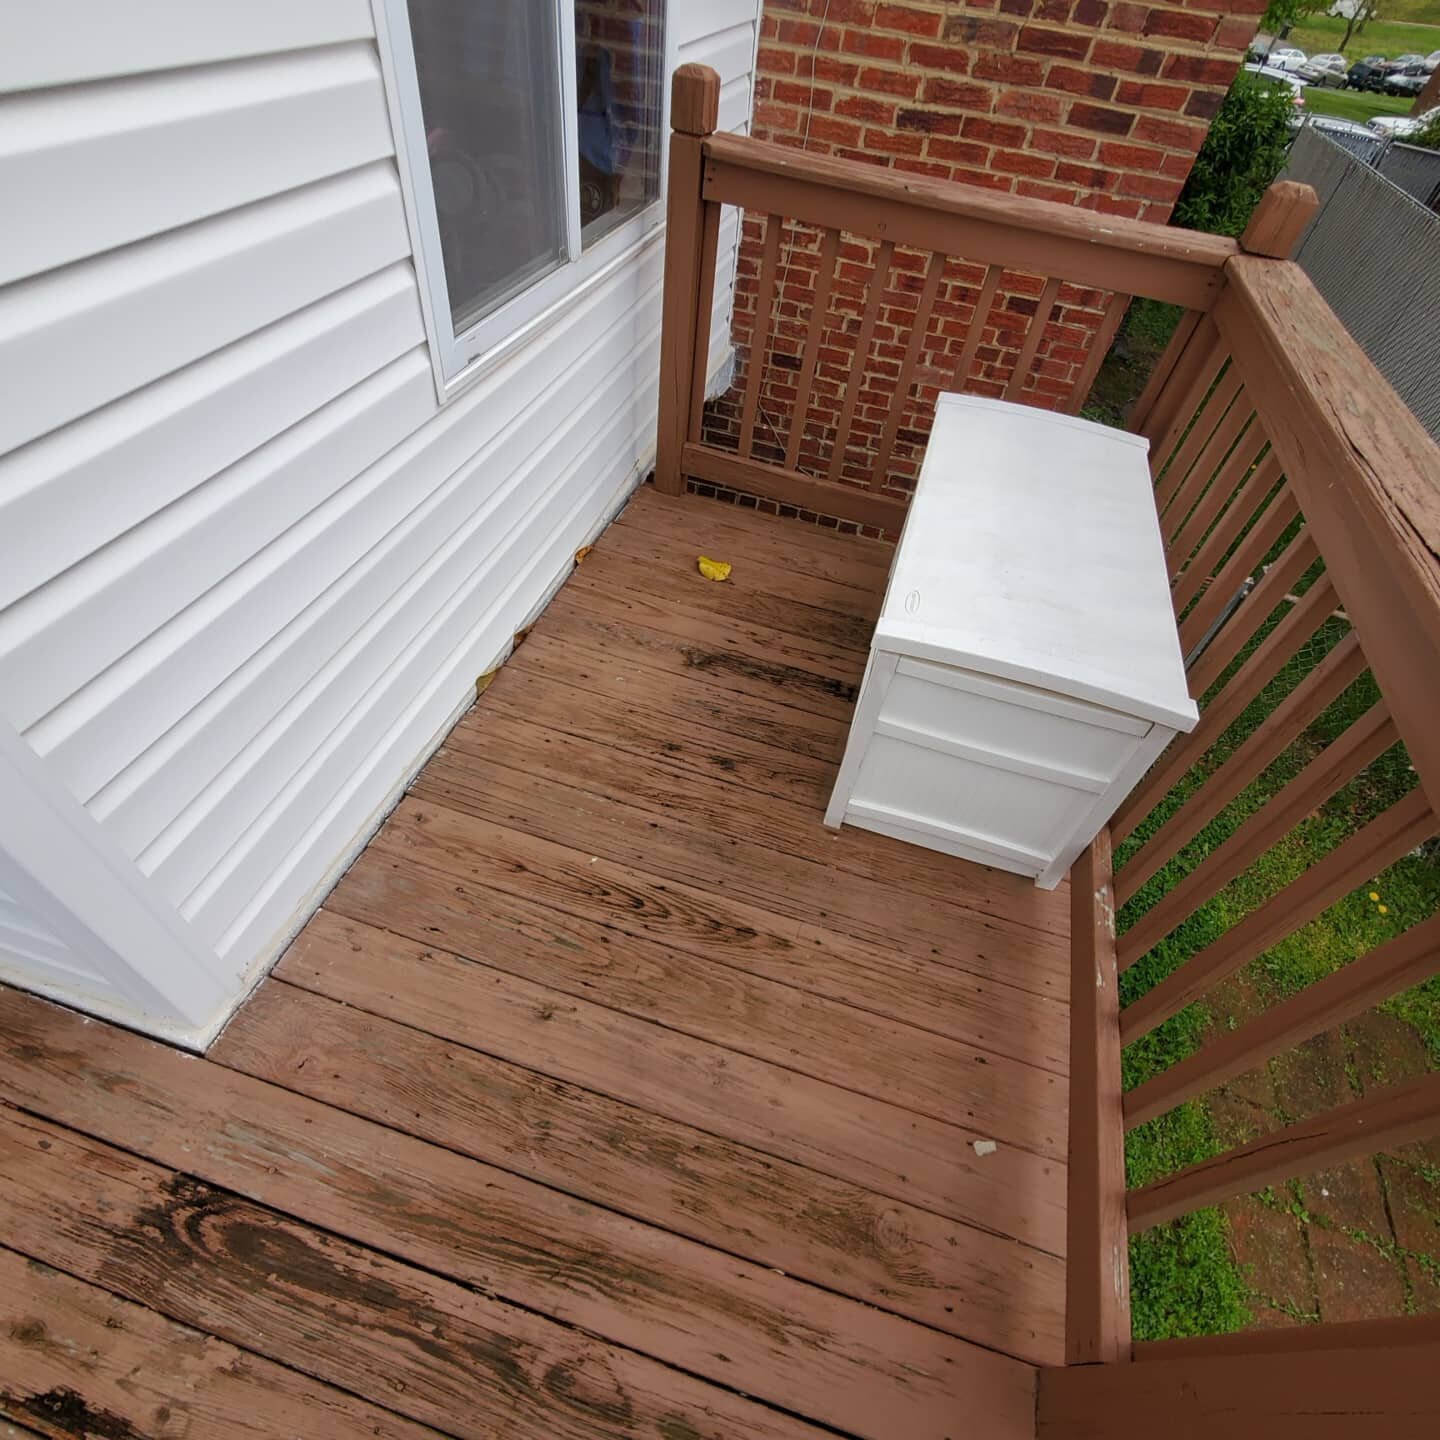 Get your Deck re-boarded
Sometimes a deck is to far gone to refinish and its best to start over with fresh lumber especially on the high traffic areas of your deck 
Call today for your free estimate 
#TheDeckDudes #springcleaning #re-board